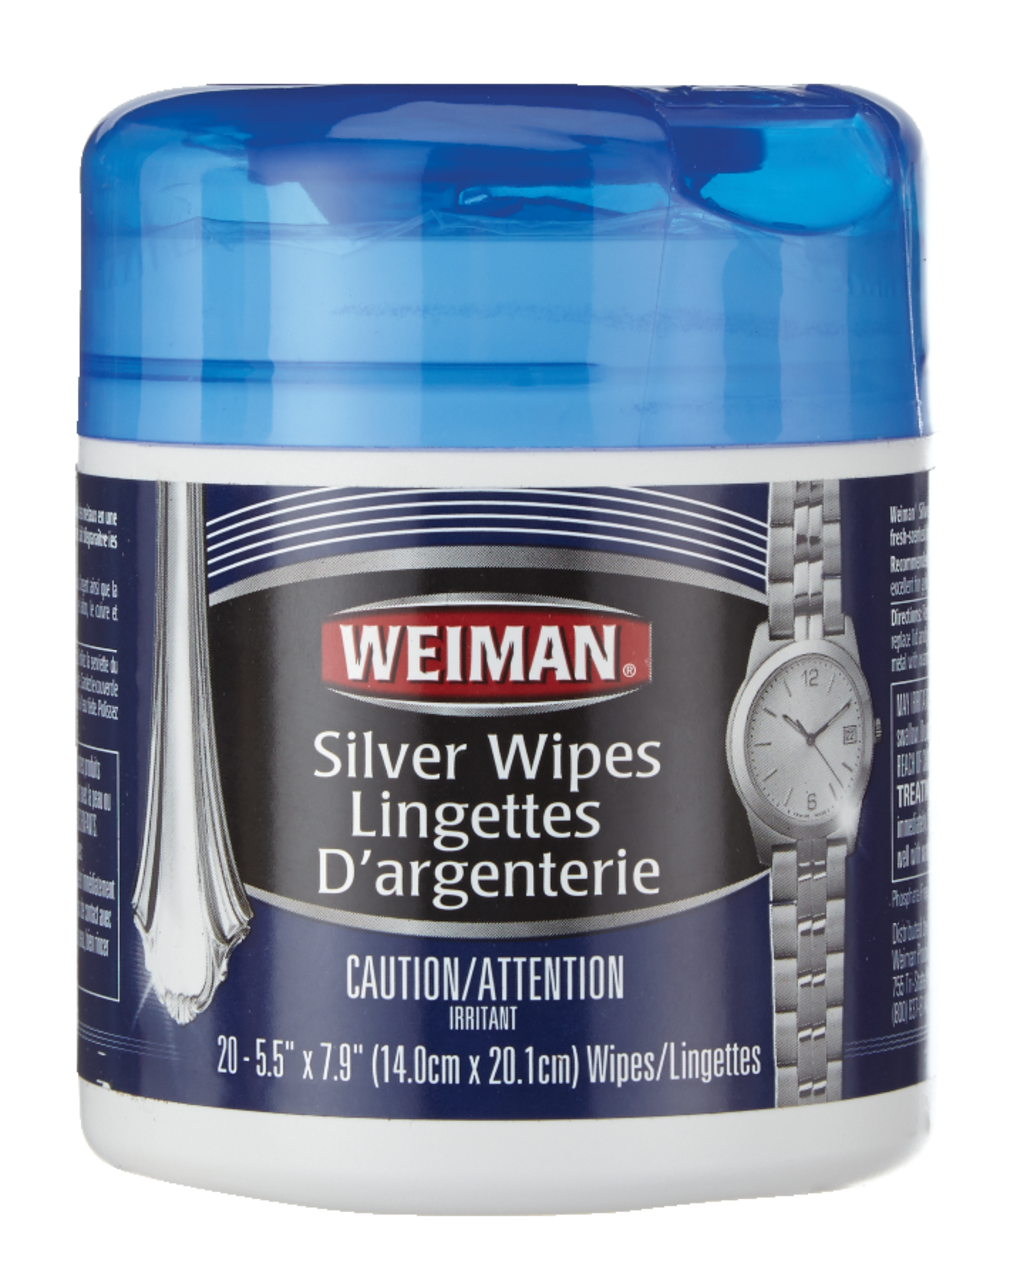 Weiman Silver Wipes Jewelry Polish Cleaner - 20 Wipes 41598000485